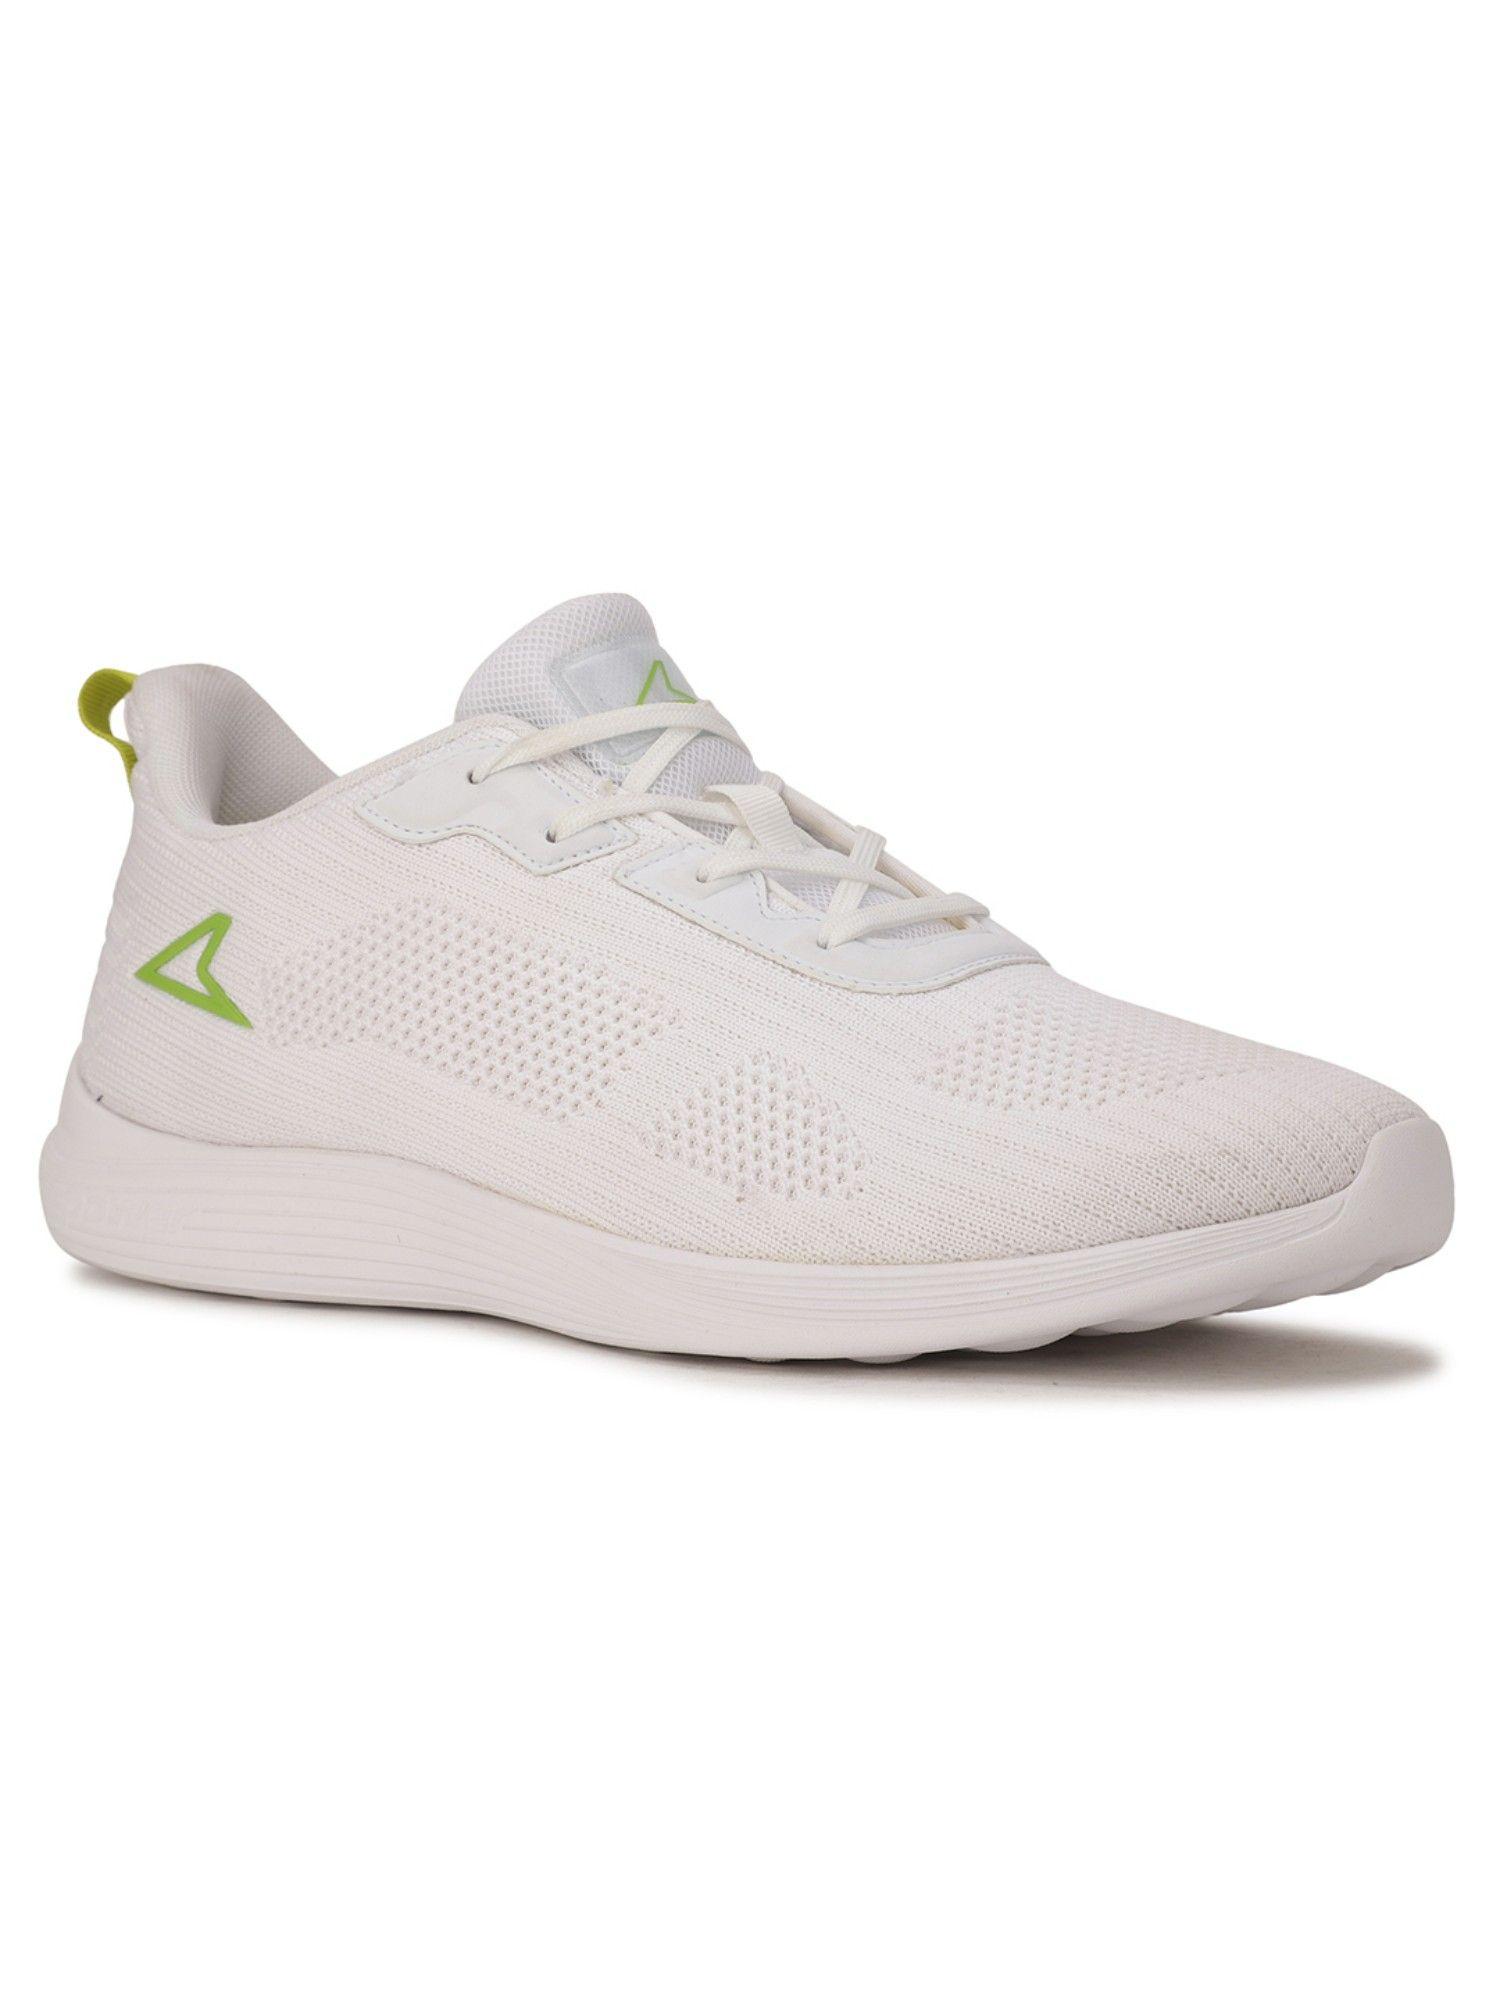 training & gym shoes for men (white)